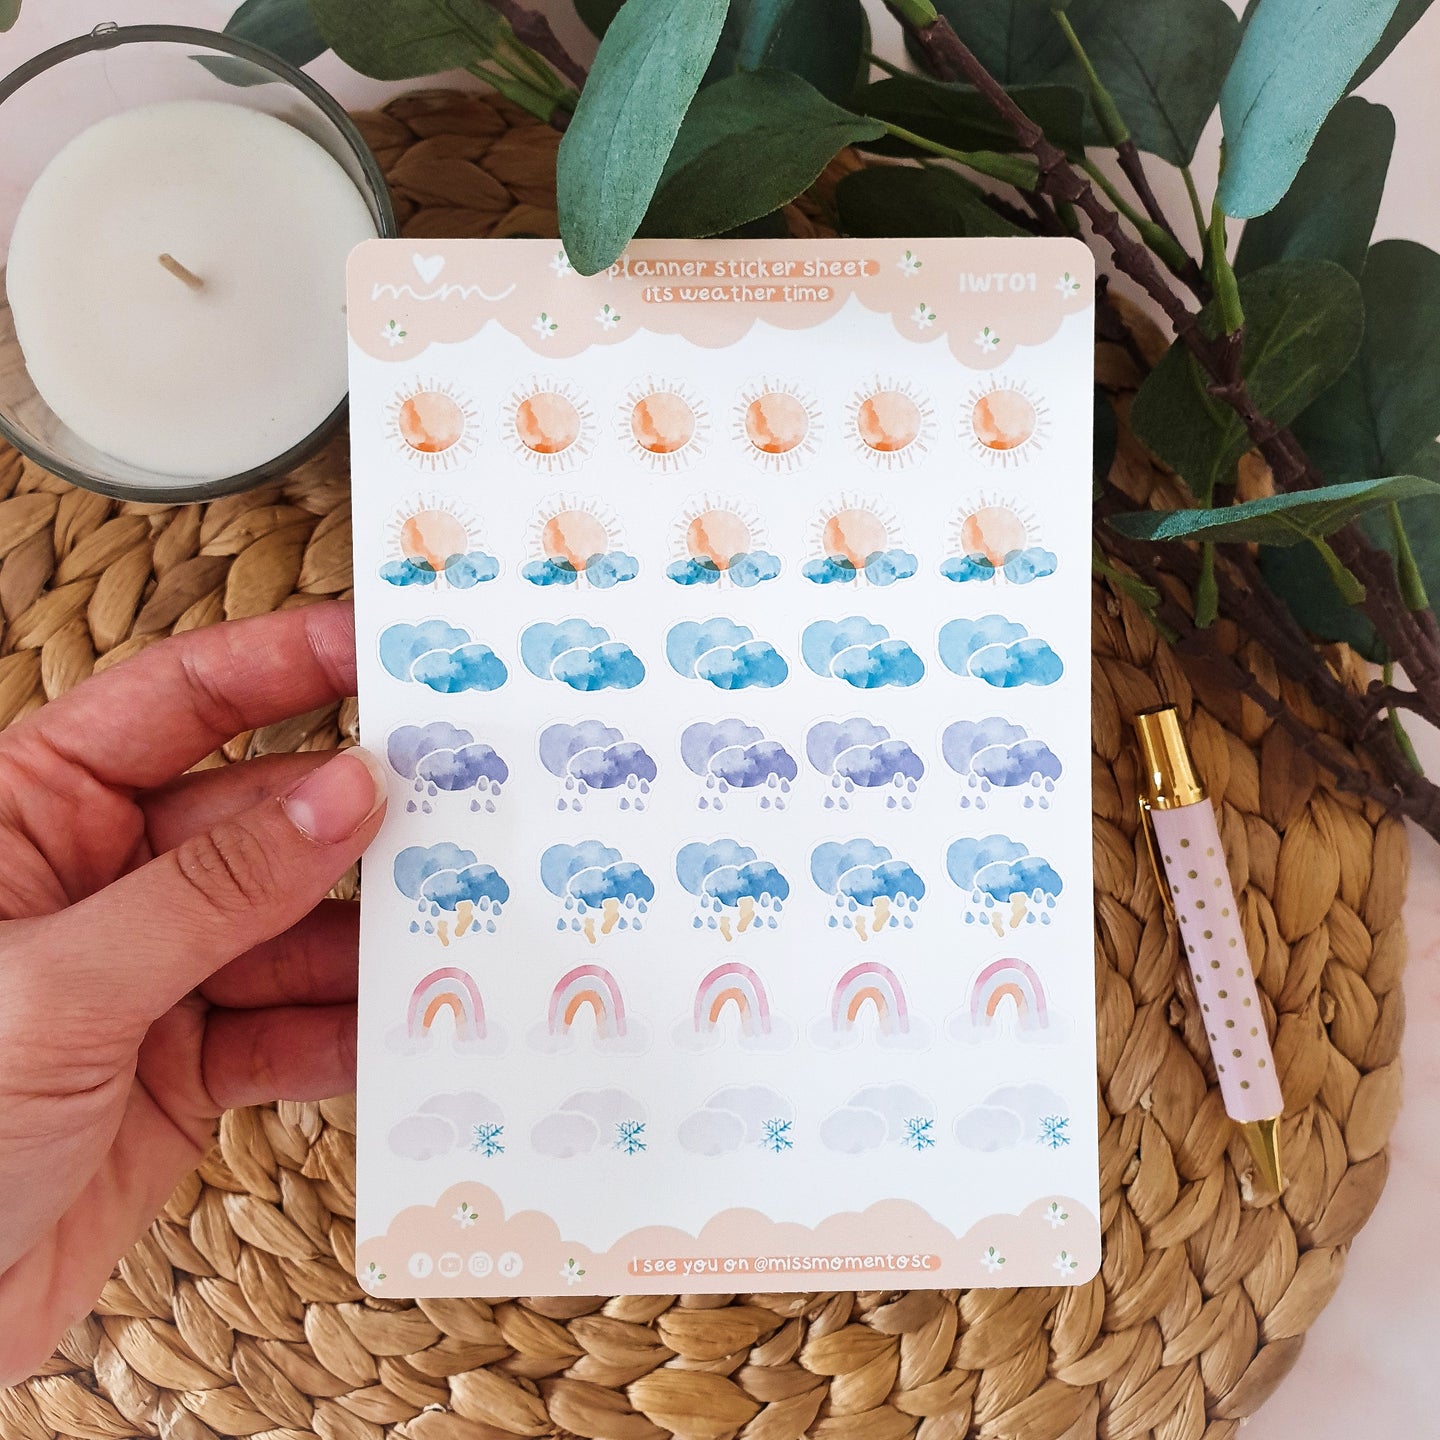 Sheet of sticker for agenda watercolor effect | Its weather time!